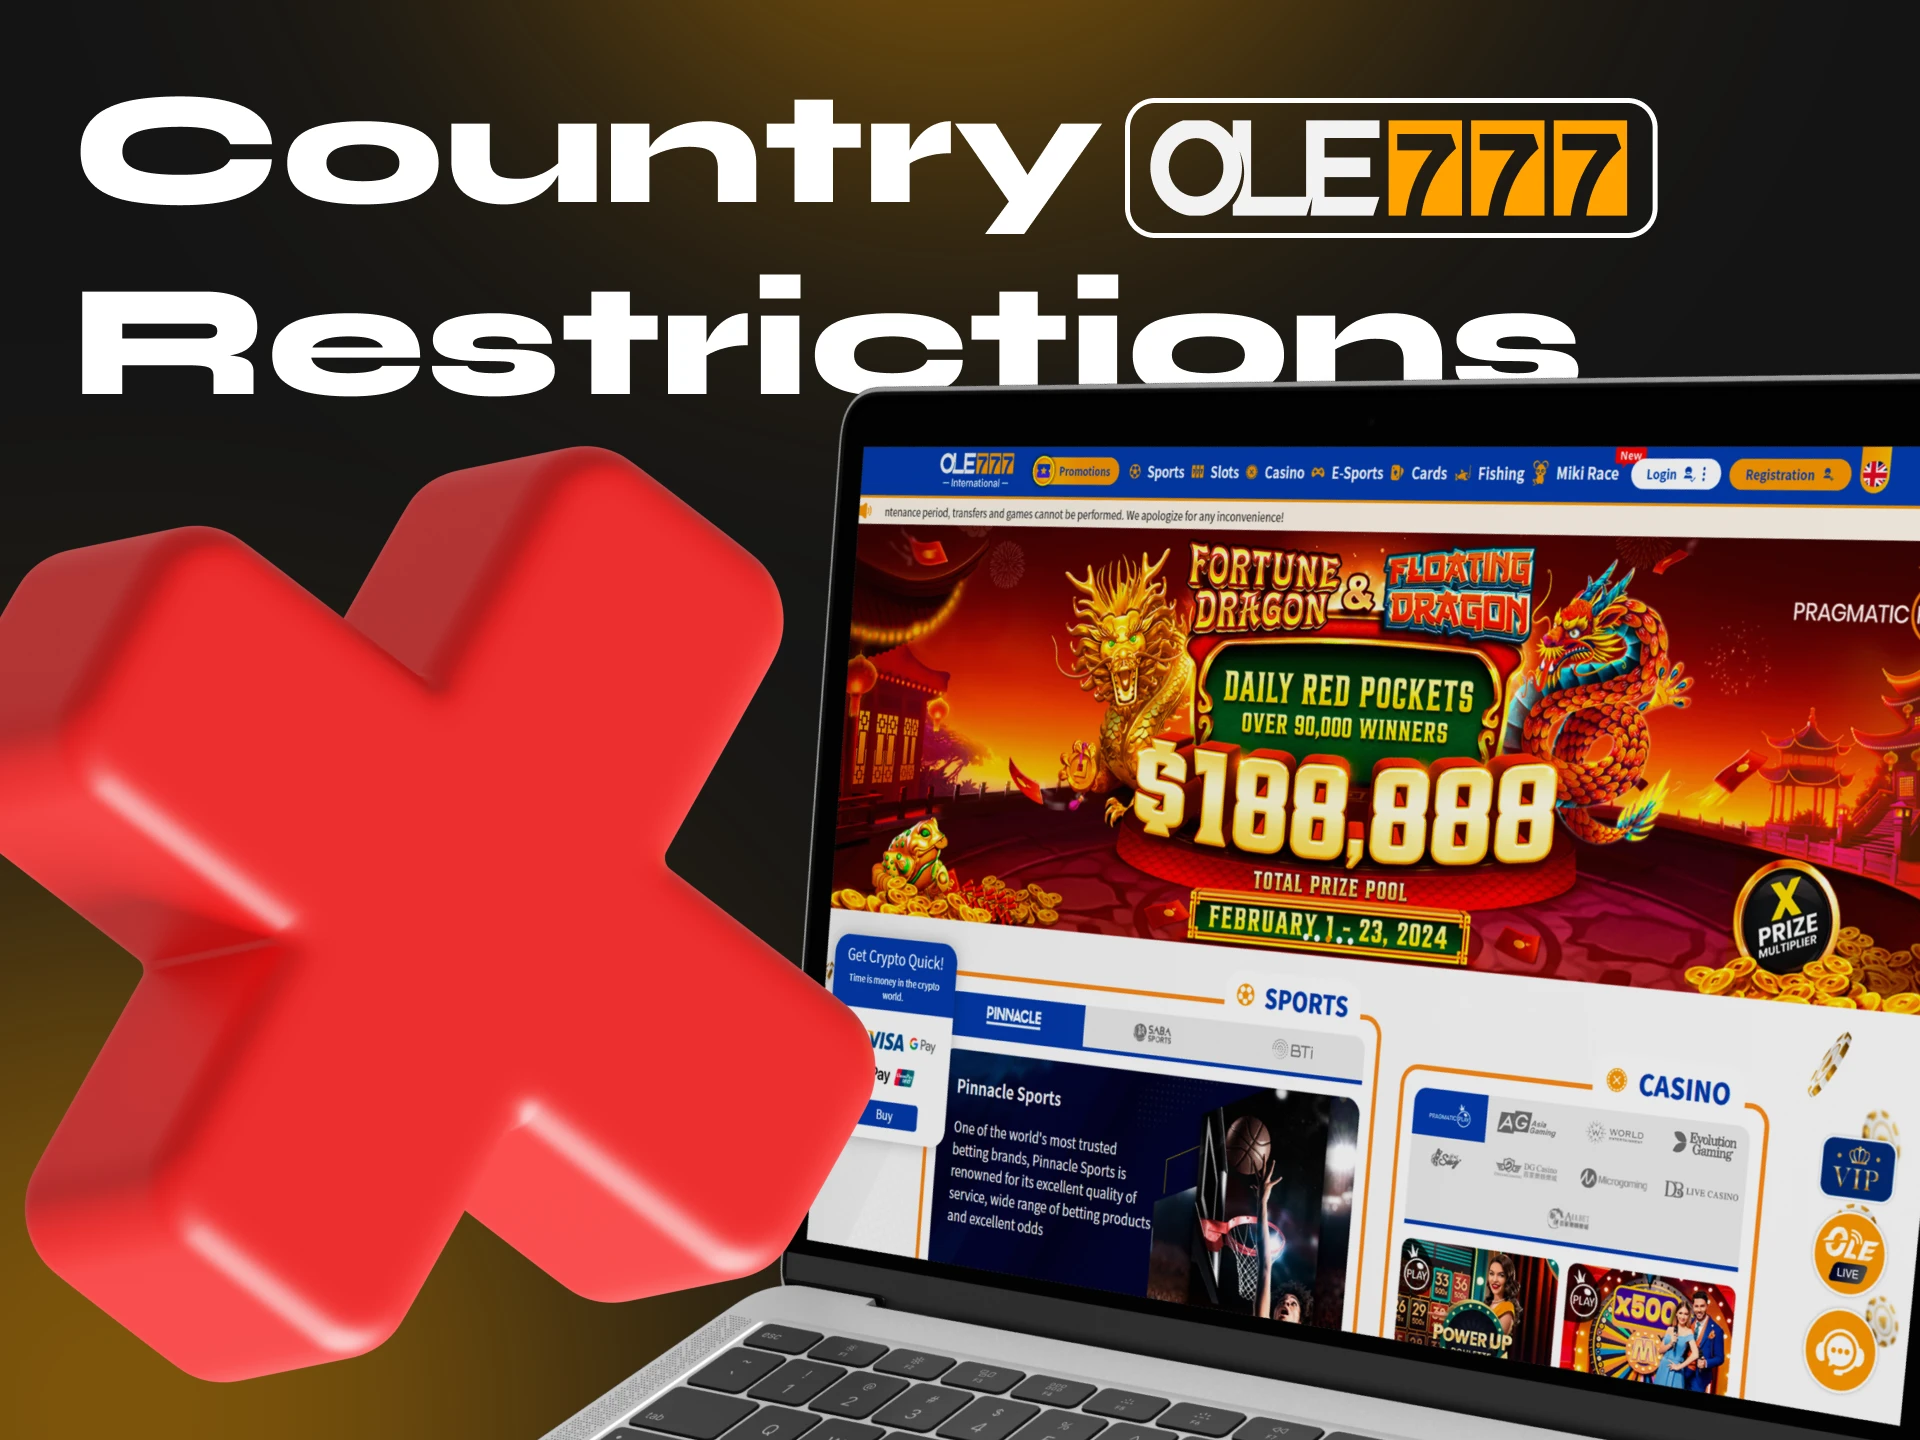 Find out if any countries have restrictions on Ole777 casino.